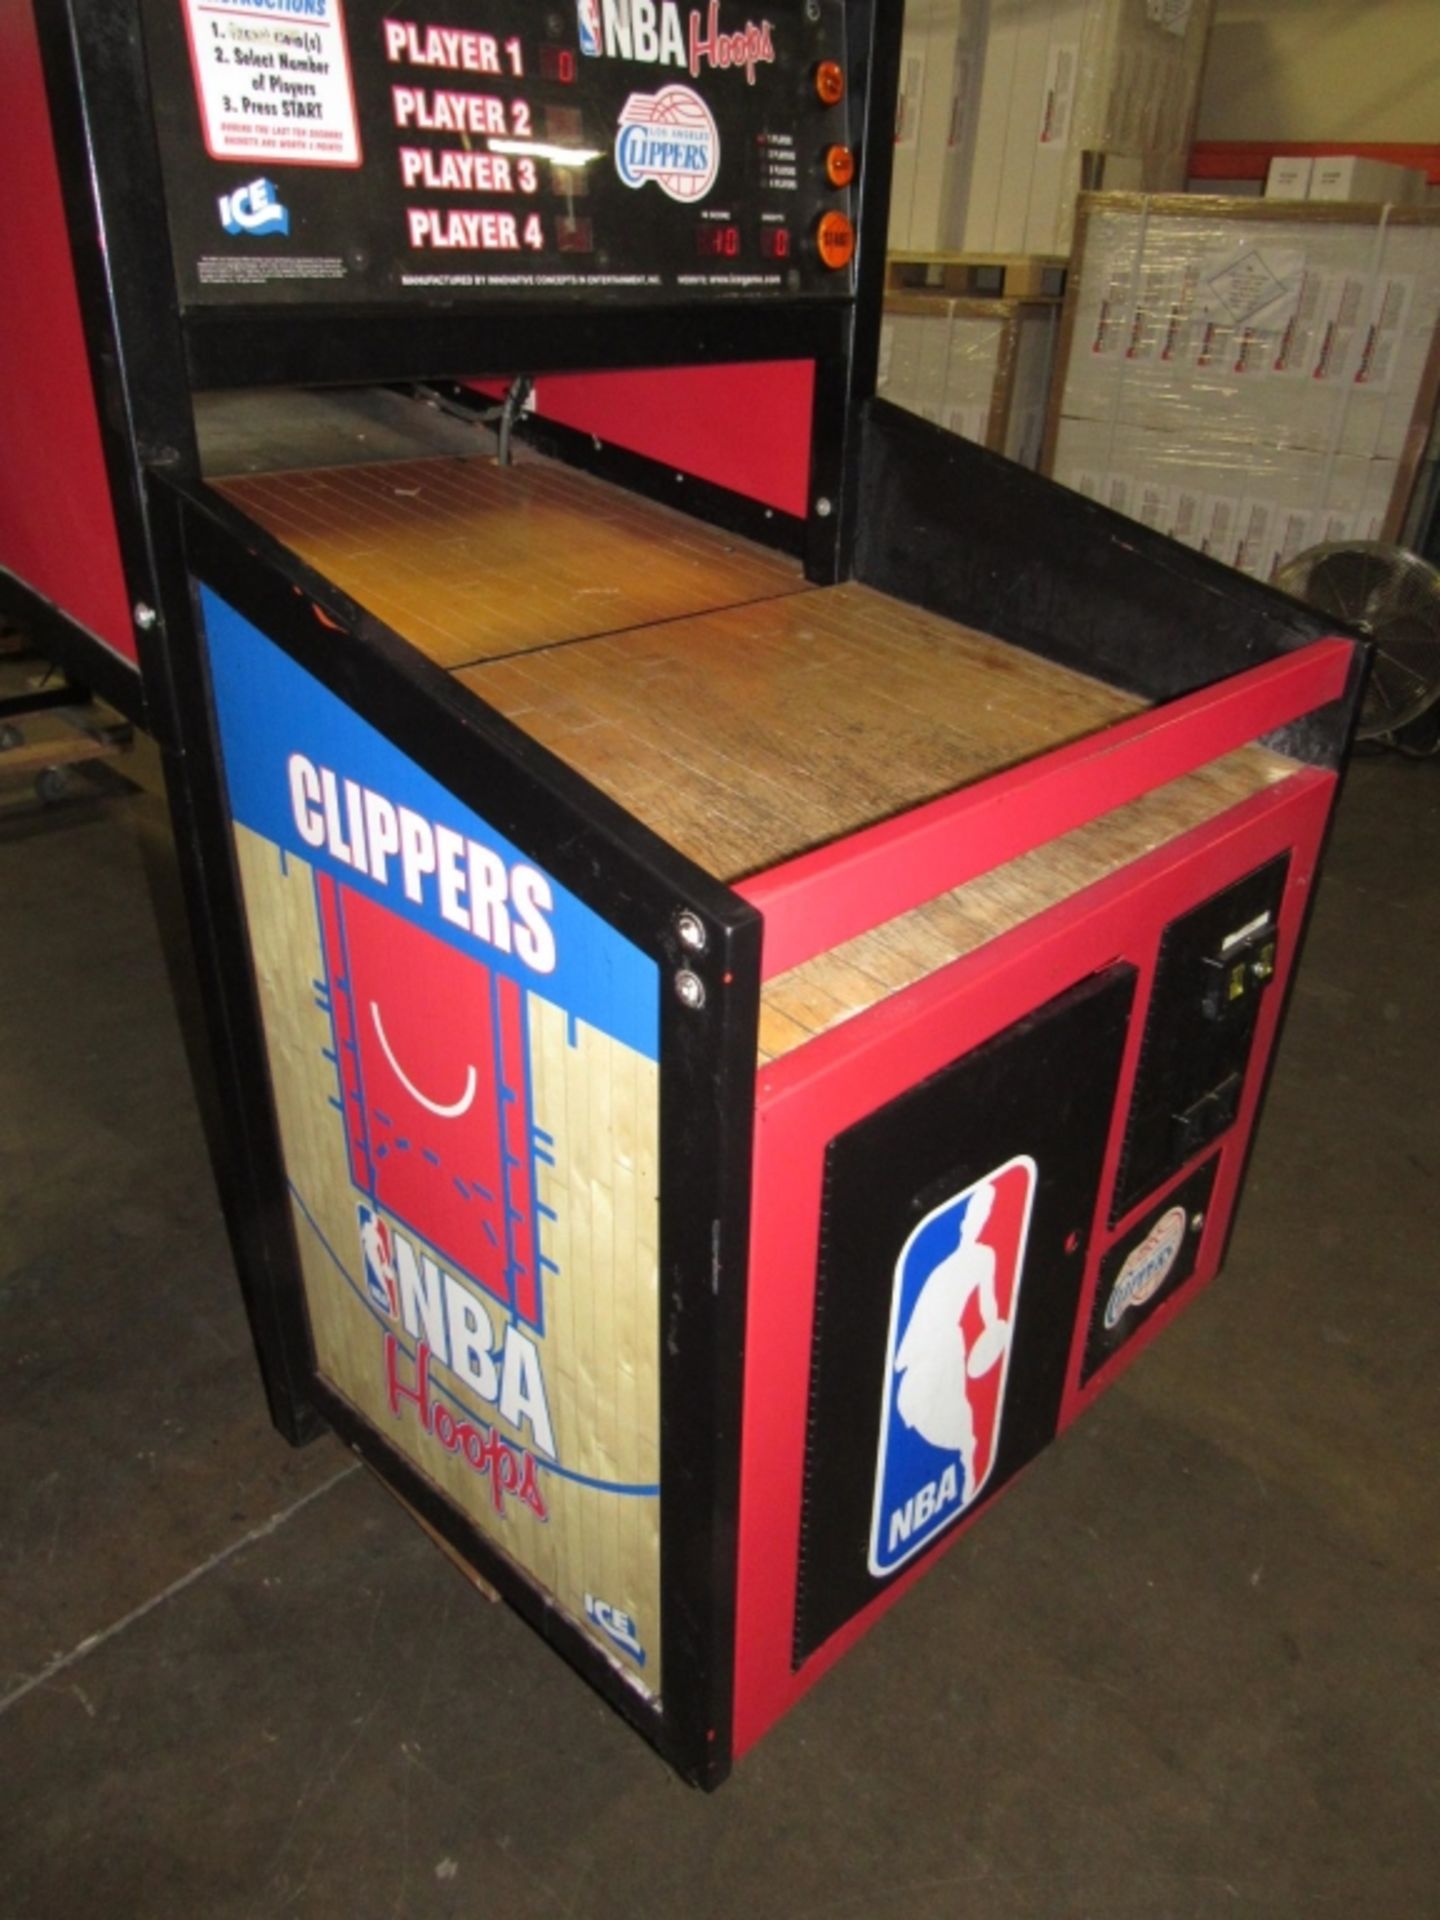 NBA HOOPS L.A. CLIPPERS BASKETBALL REDEMPTION GAME - Image 6 of 6